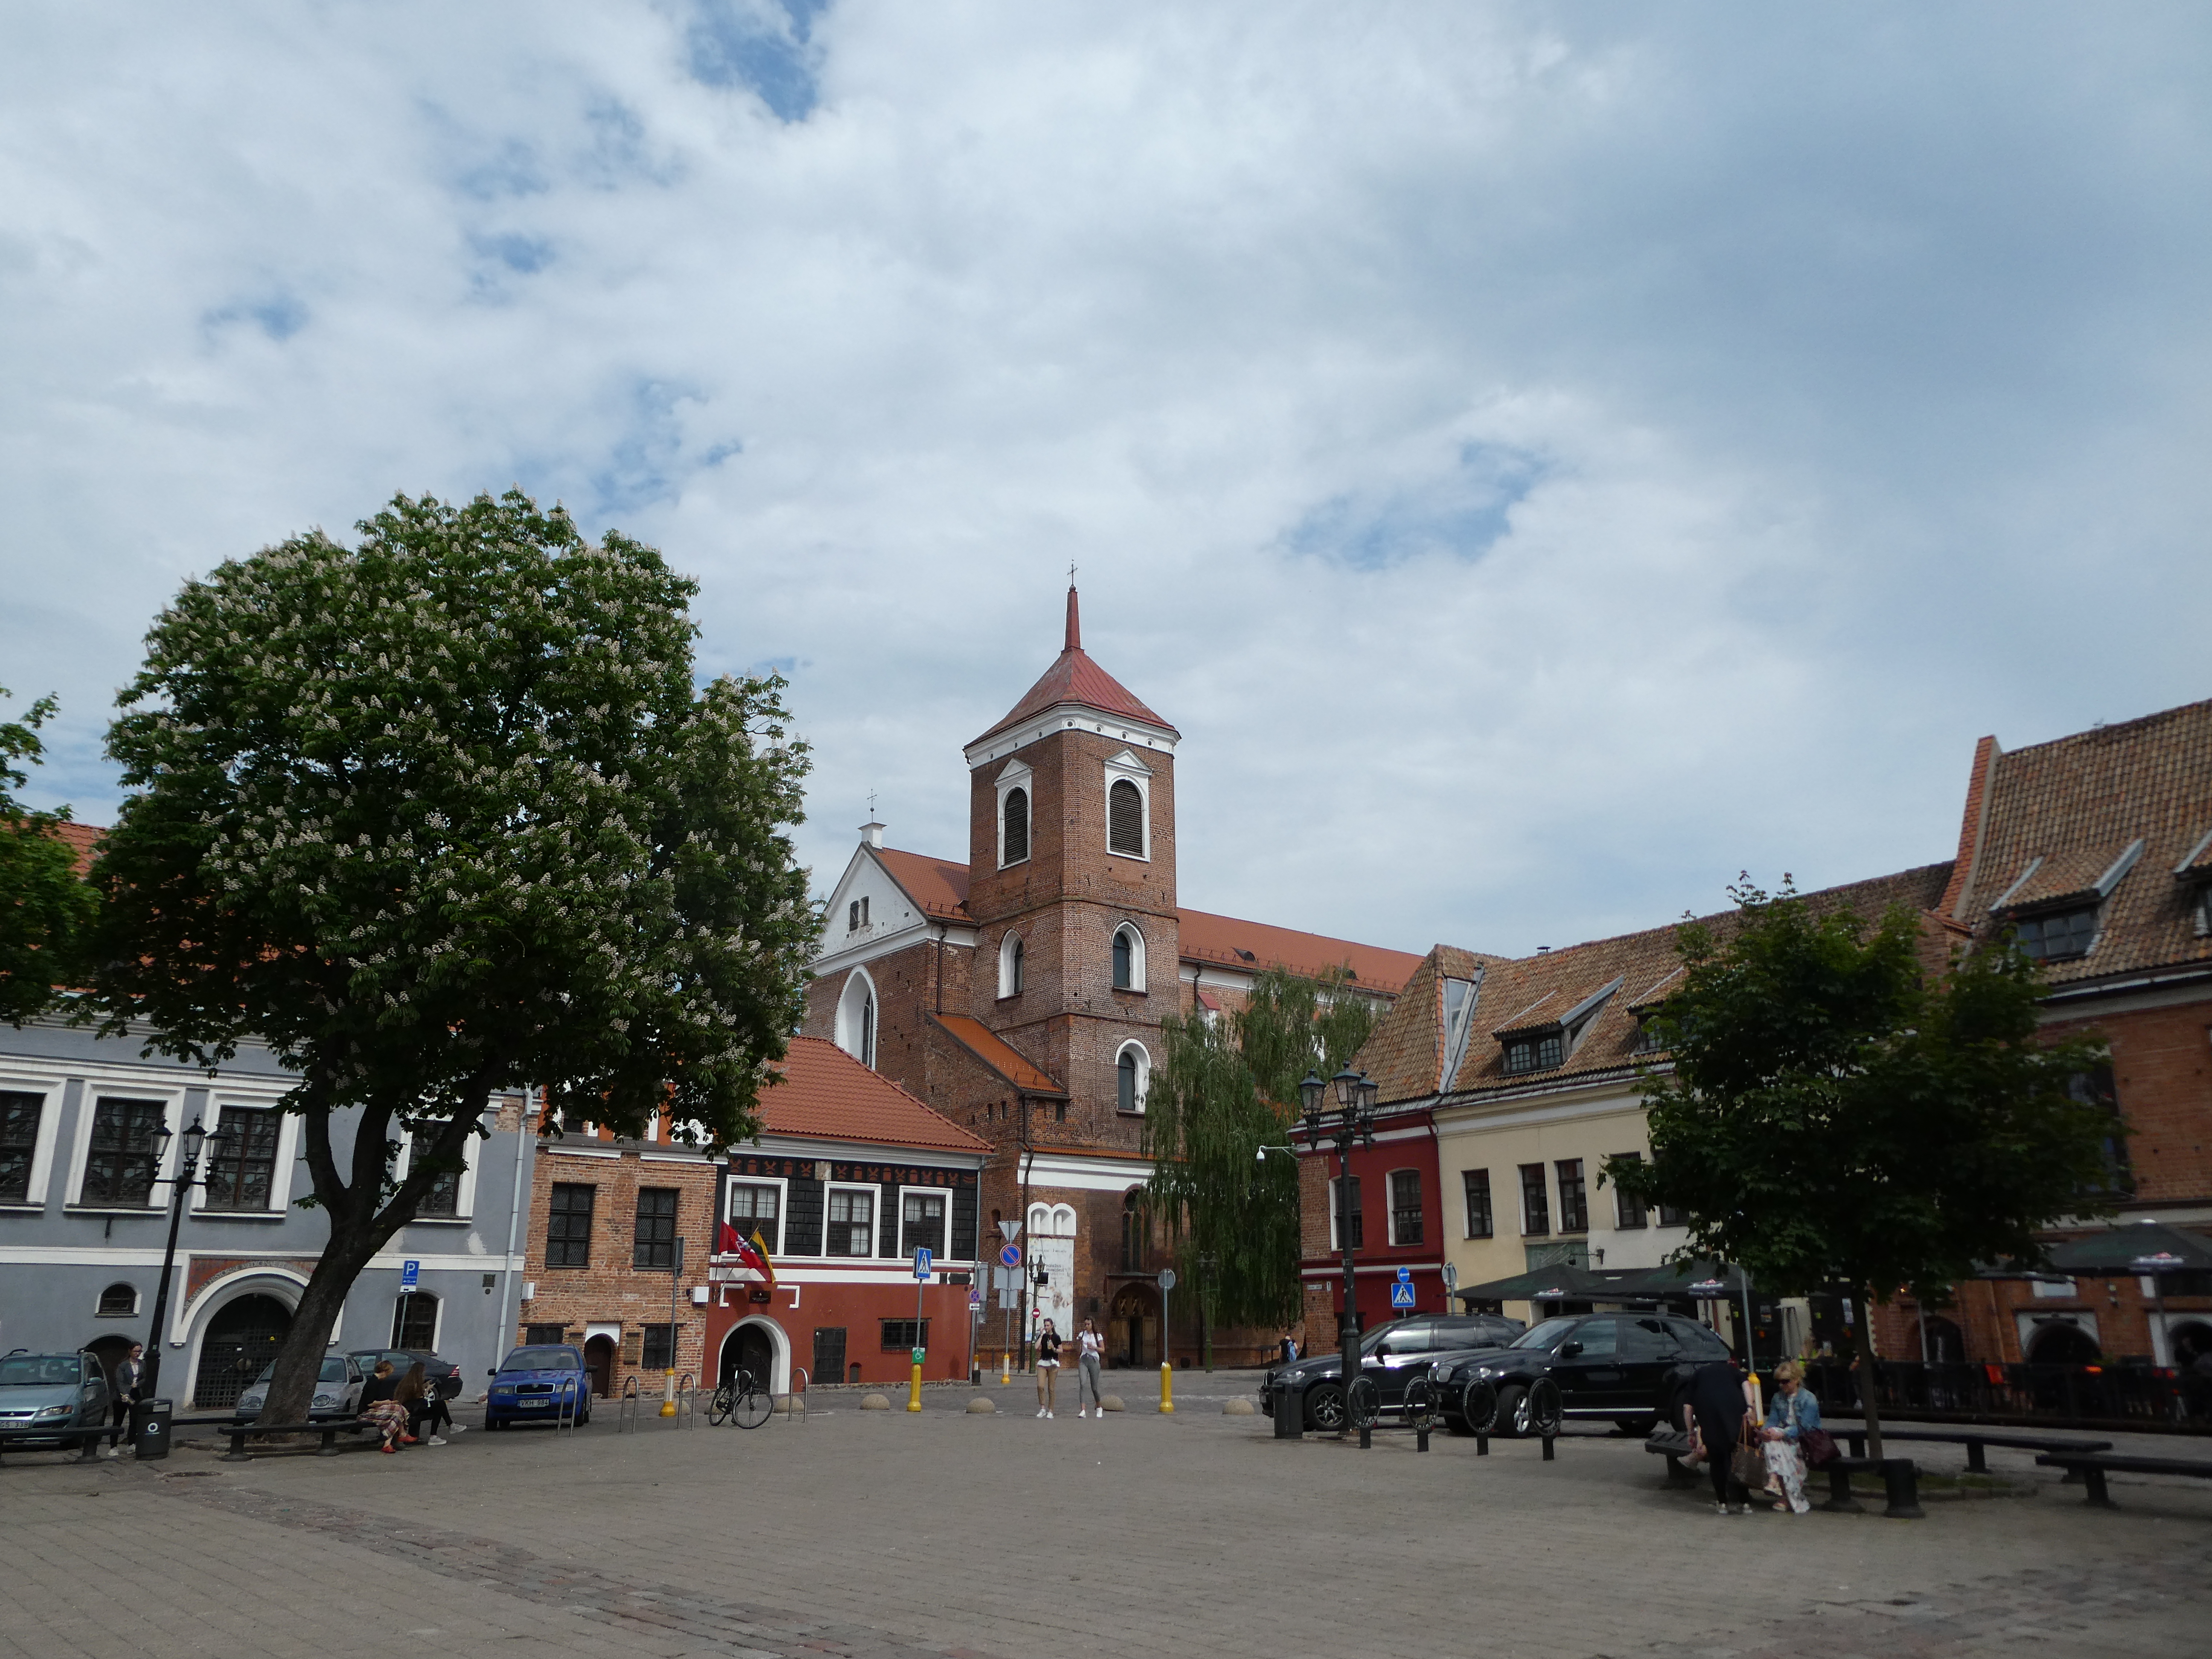 Kaunas: Main Square in the old city